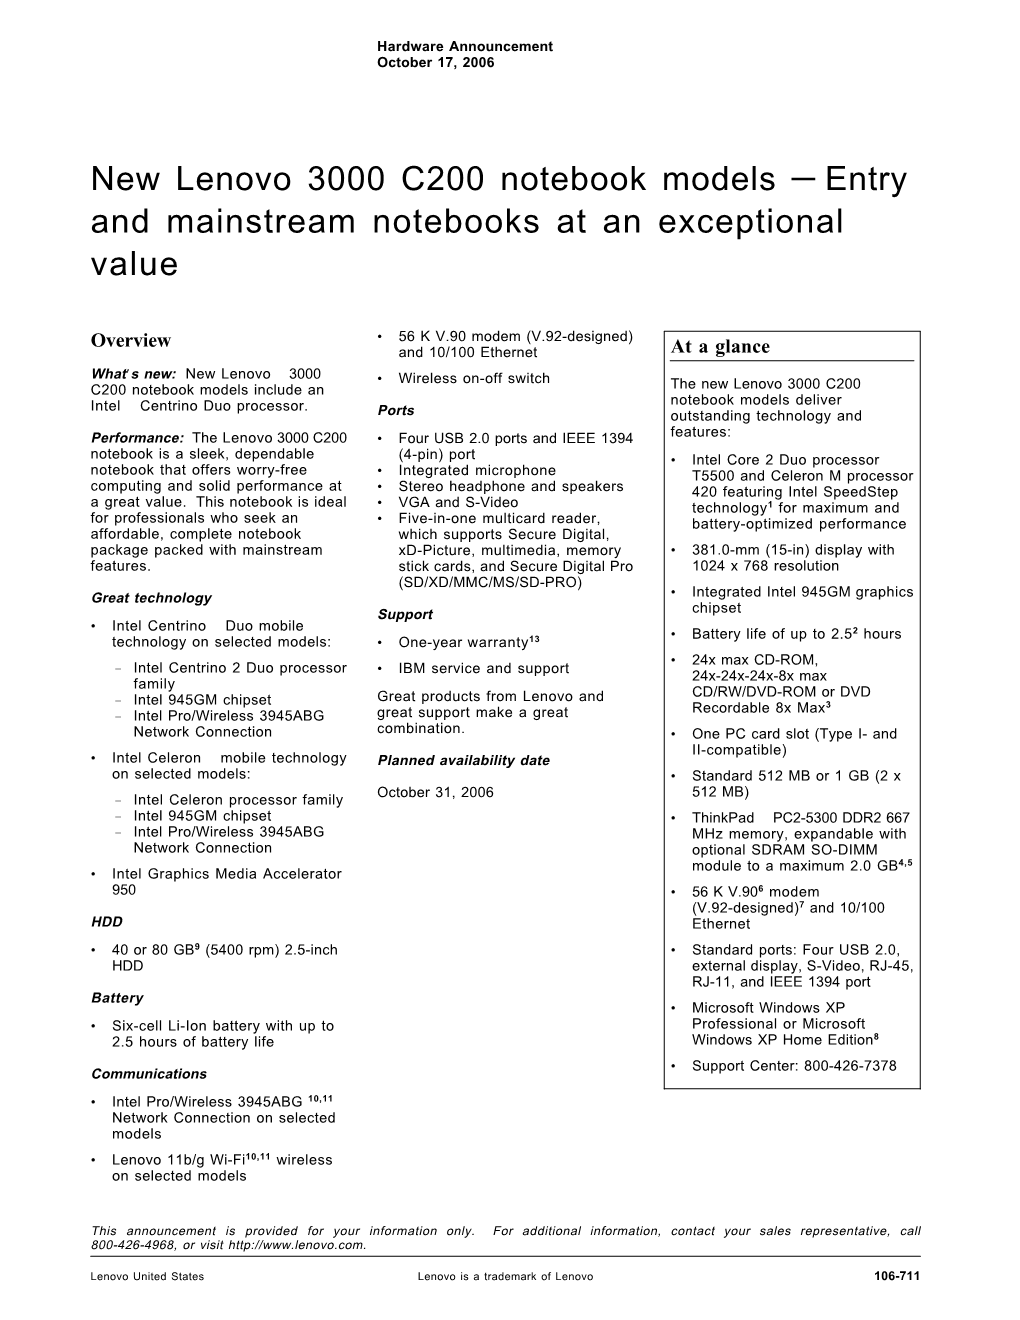 New Lenovo 3000 C200 Notebook Models — Entry and Mainstream Notebooks at an Exceptional Value